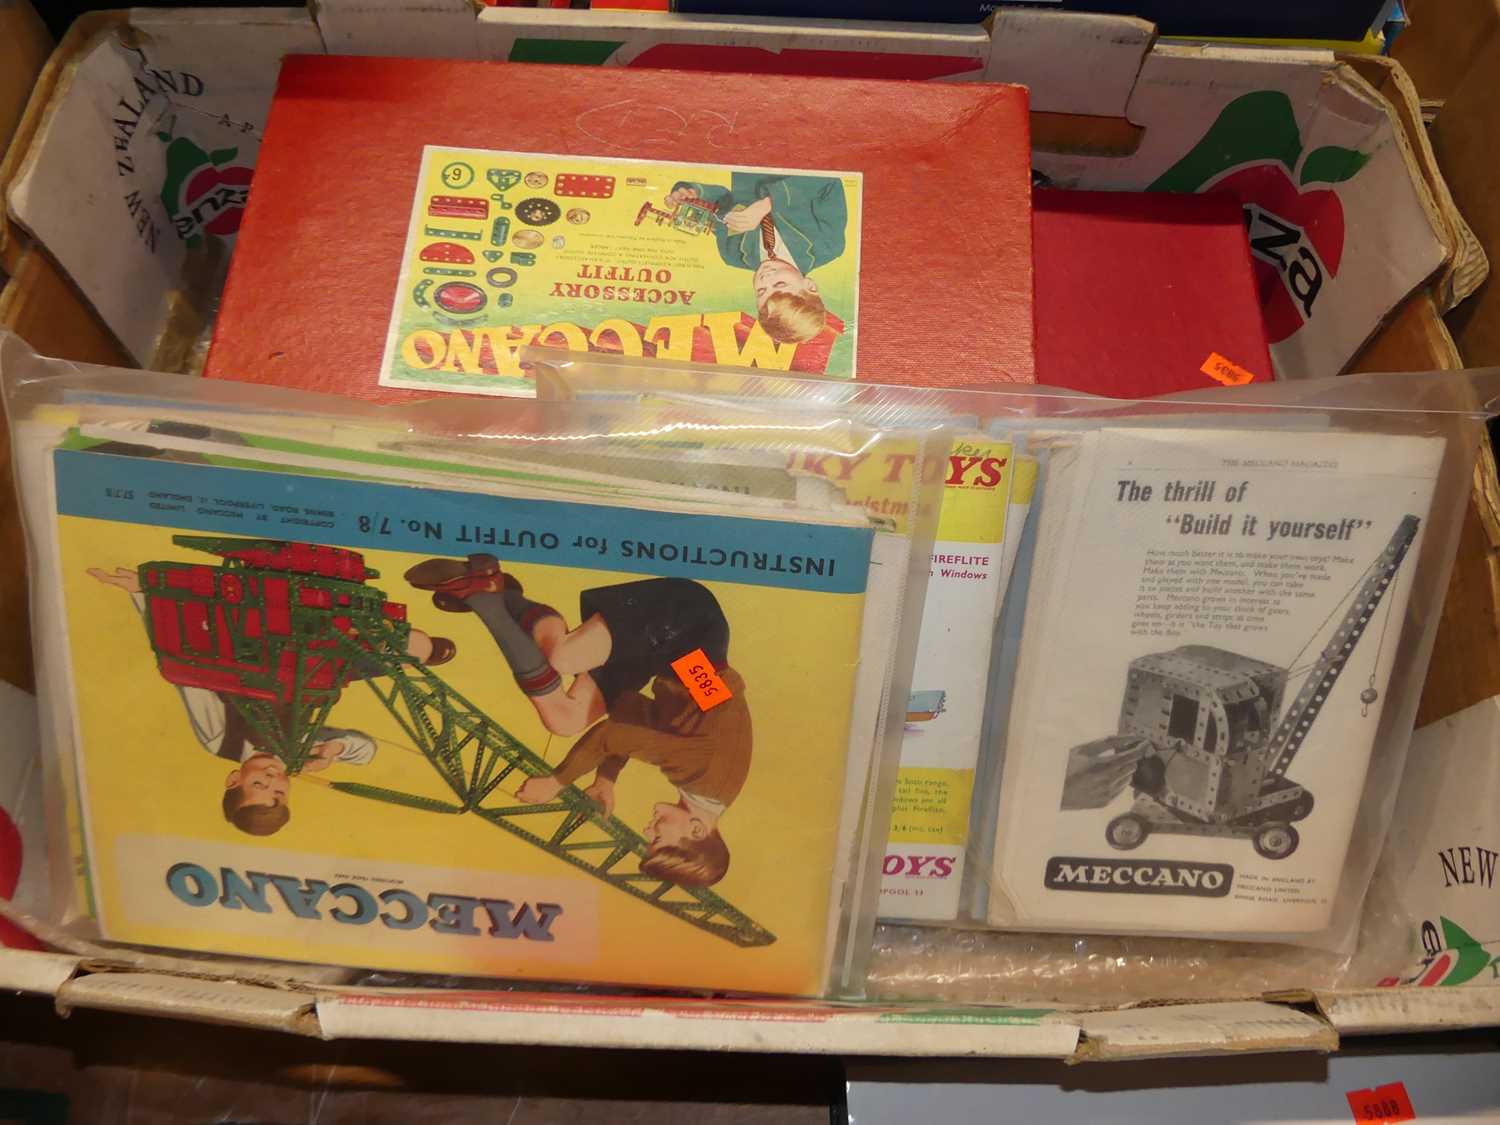 One tray of mixed Meccano construction sets and related ephemera to include a No. 6A accessory